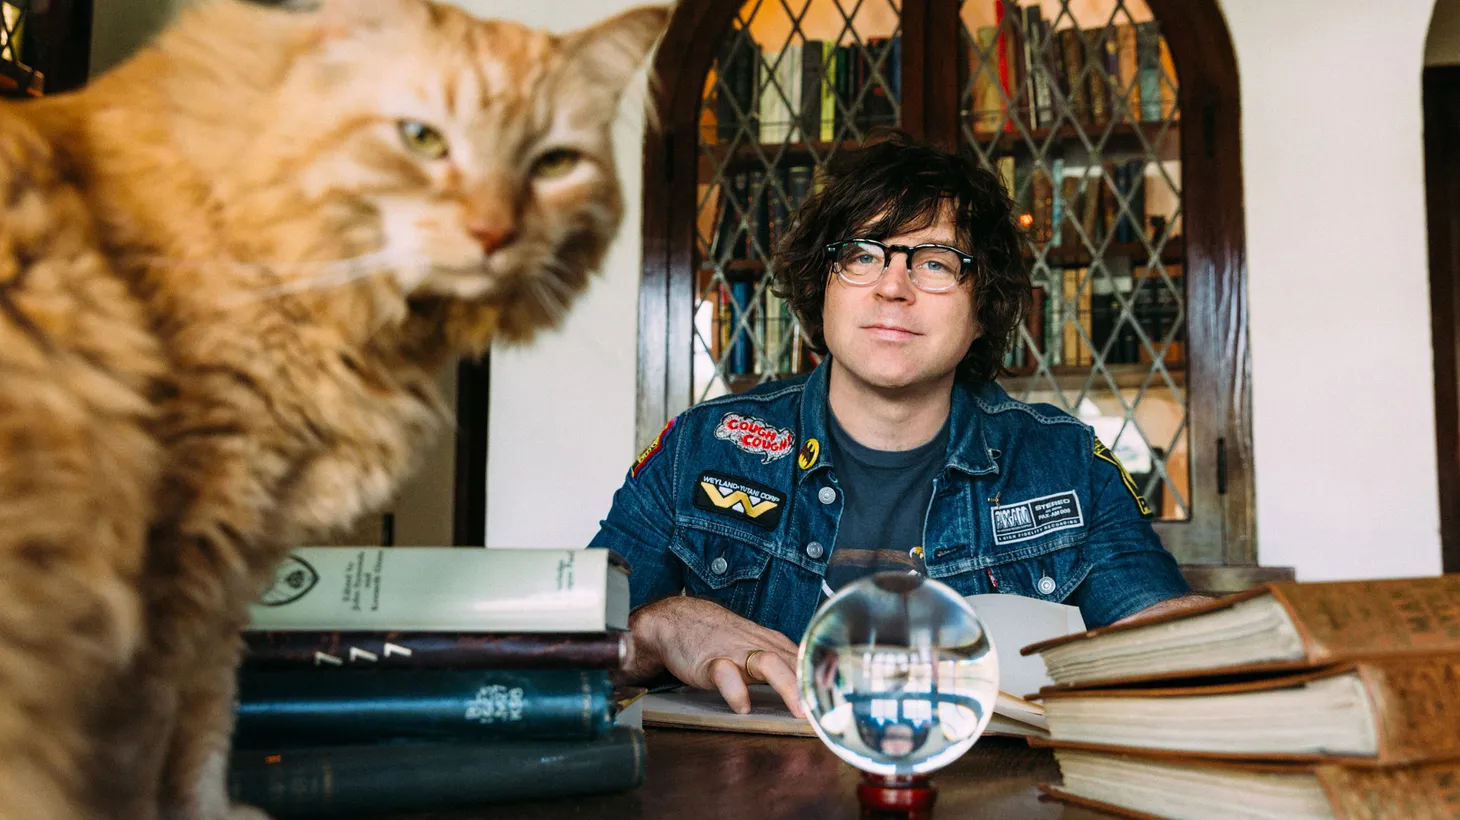 Ryan Adams recorded his 16th solo album, Prisoner, on the heels of his divorce. He channels heartbreak like no other.